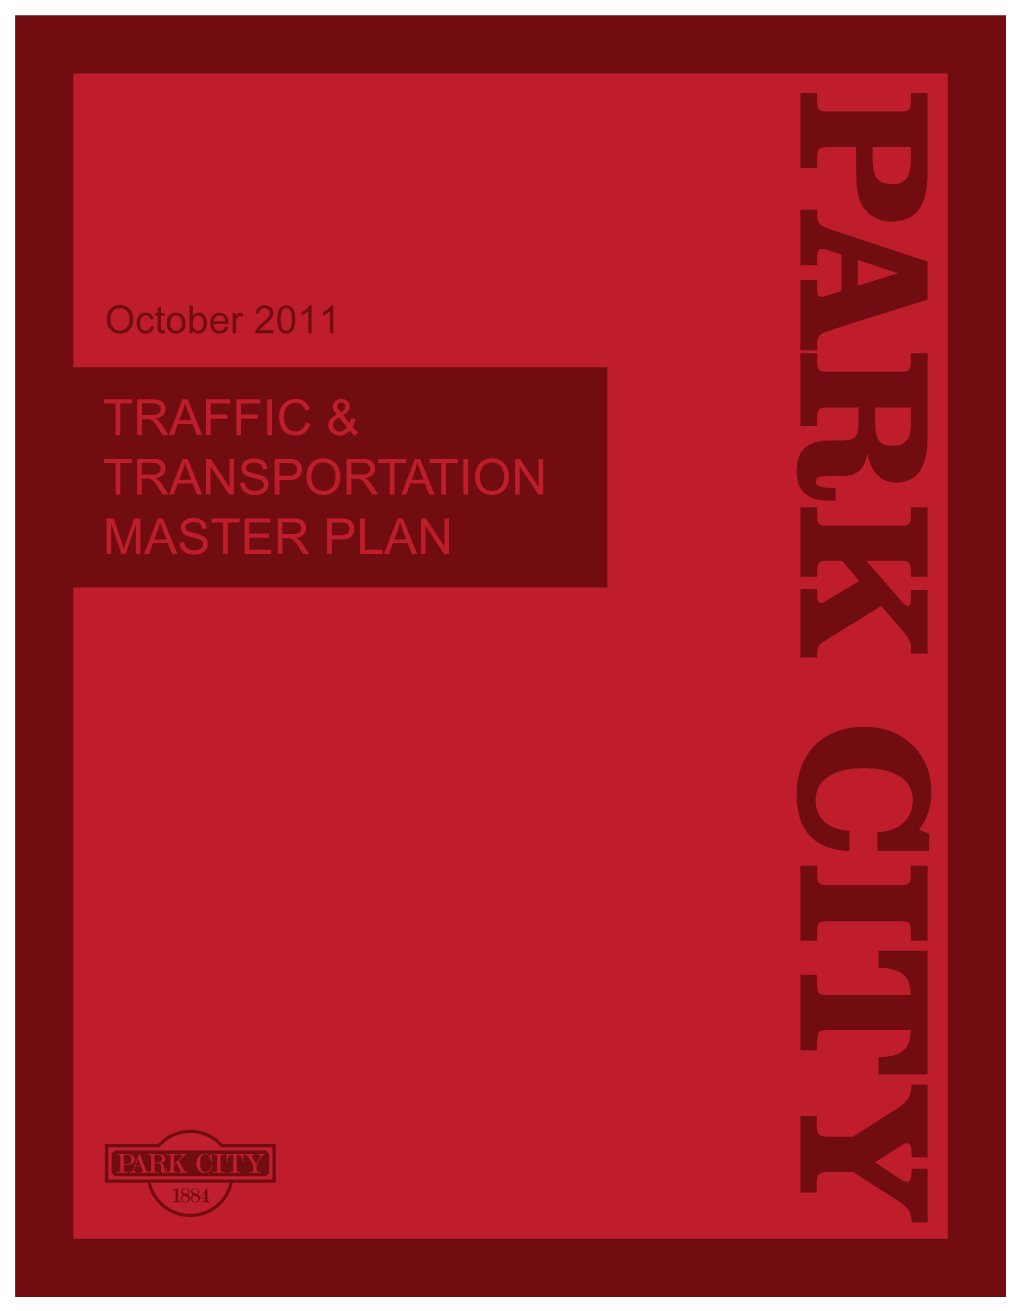 Traffic and Transportation Master Plan Were Held on October 5, 2010 and February 28, 2011